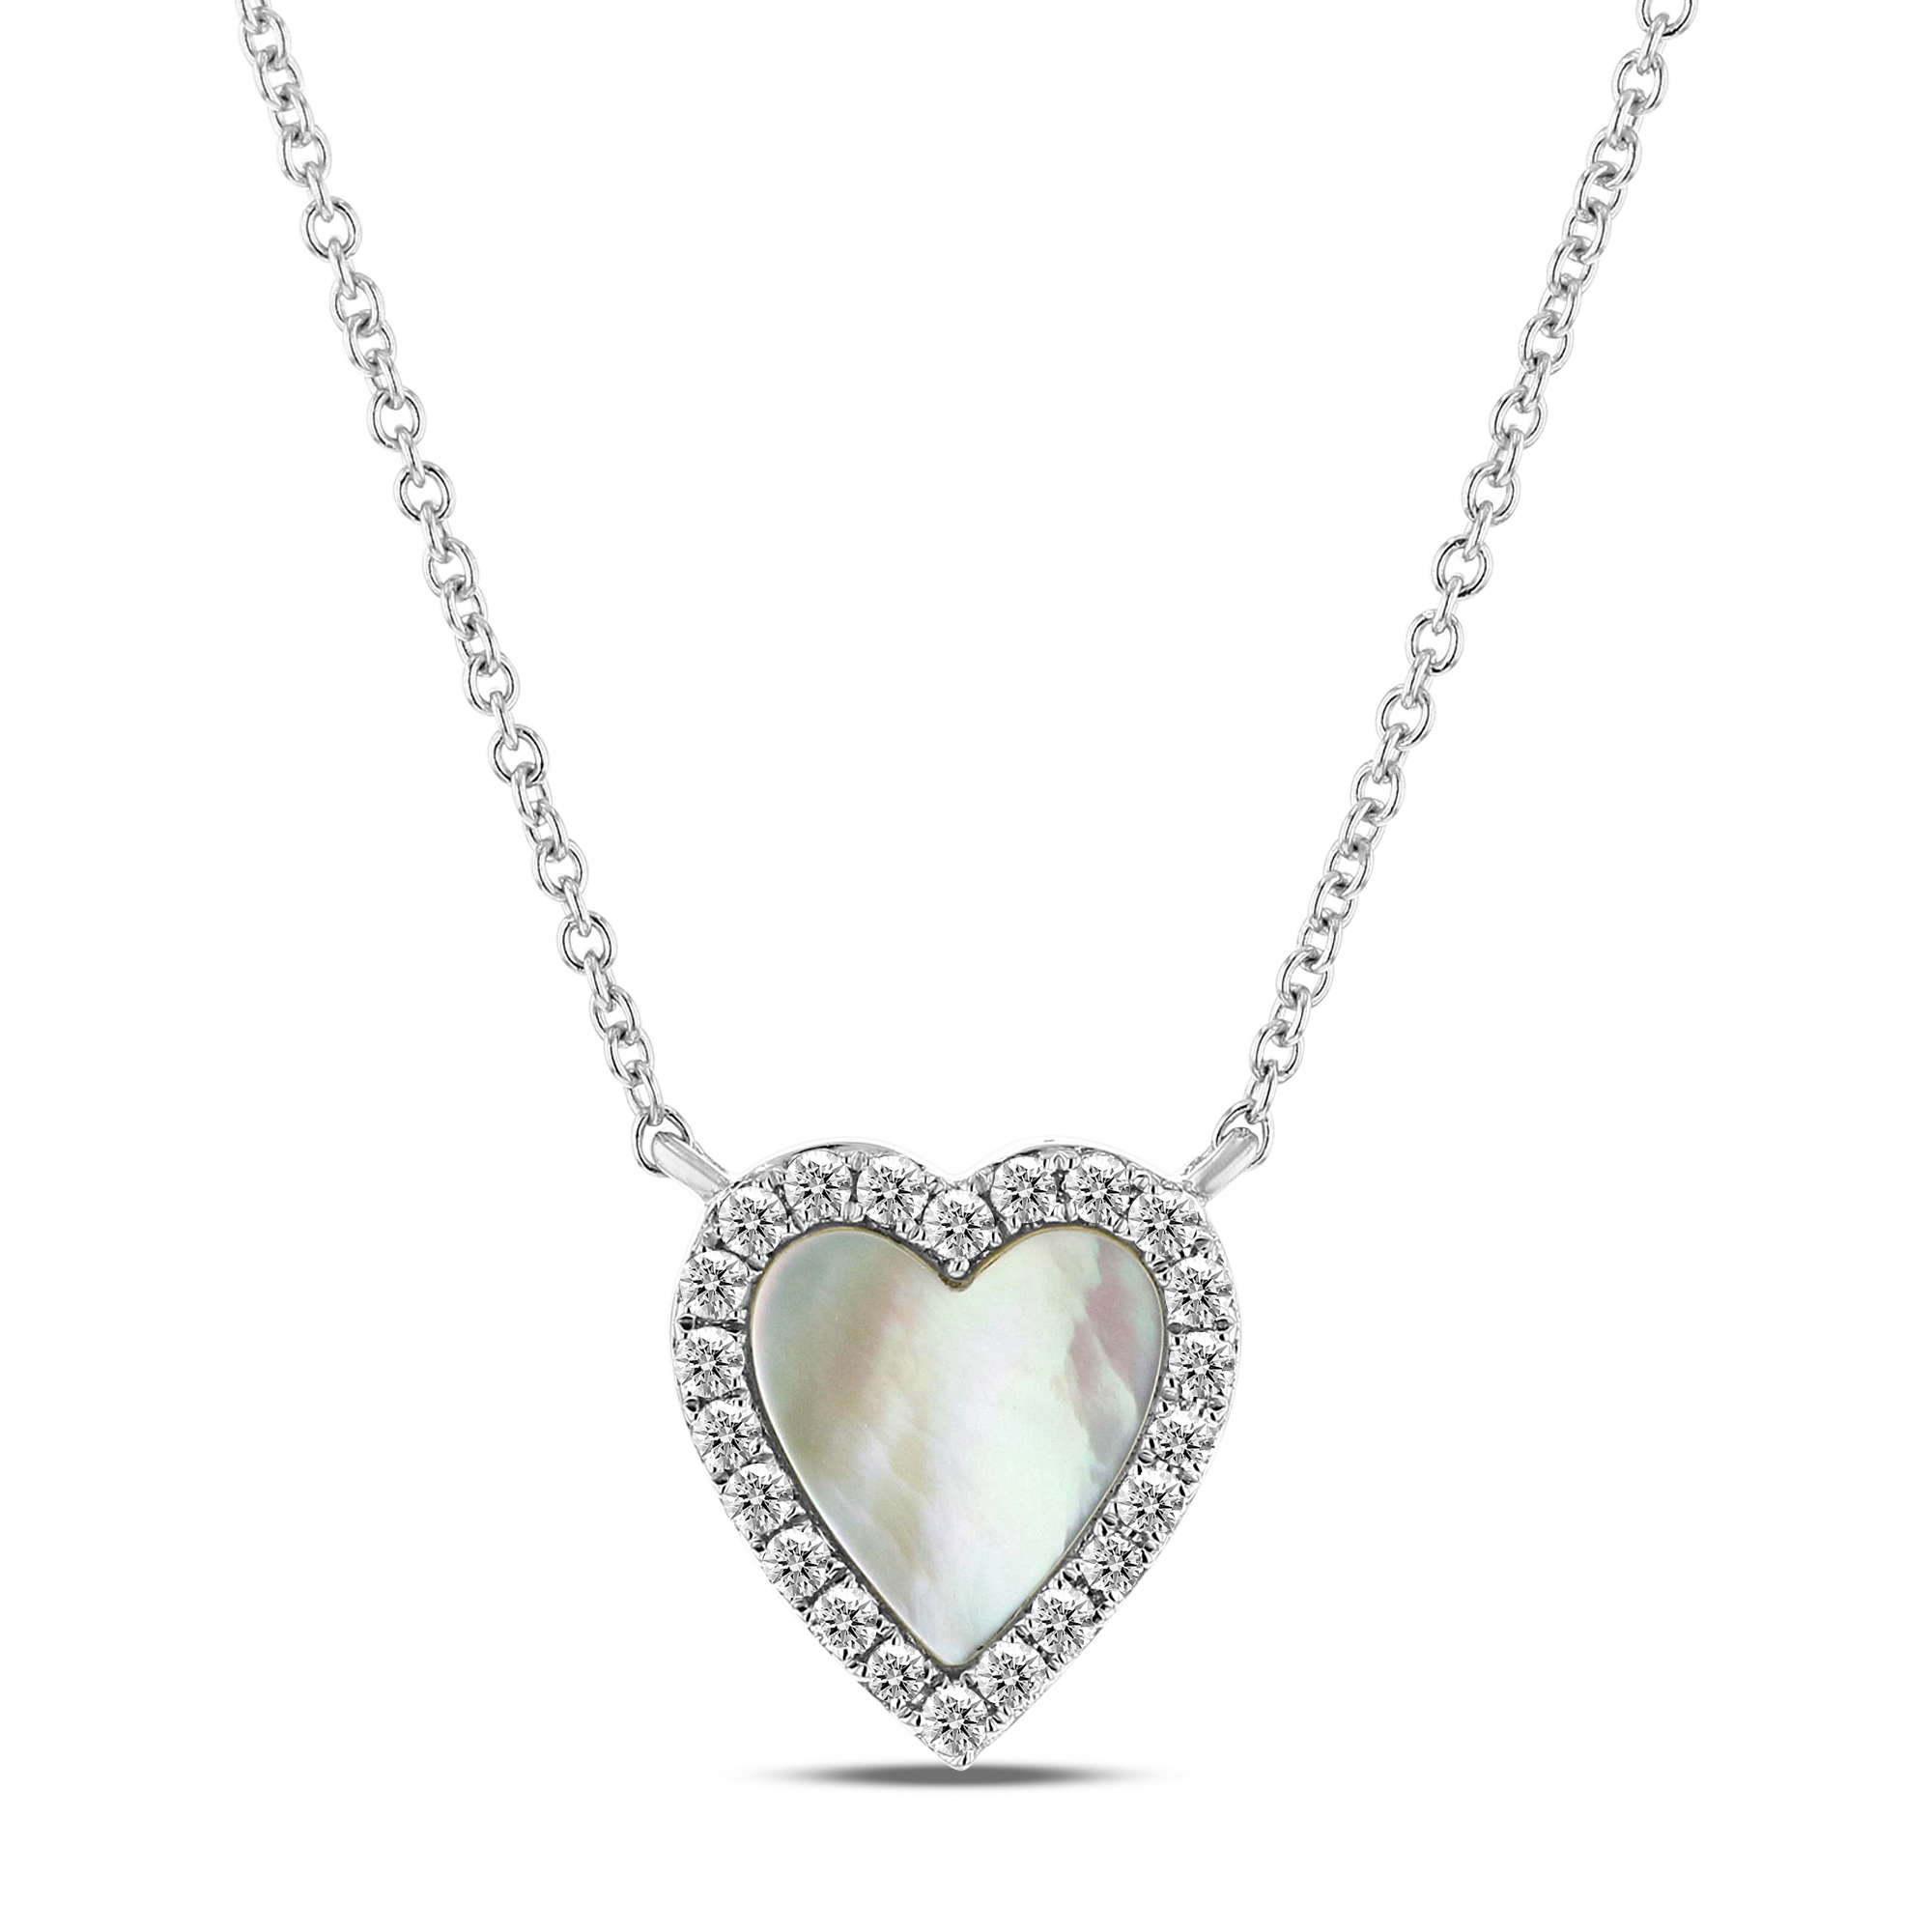 View 0.15ctw Diamond Heart Necklace with Mother of Pearl in 14k White Gold